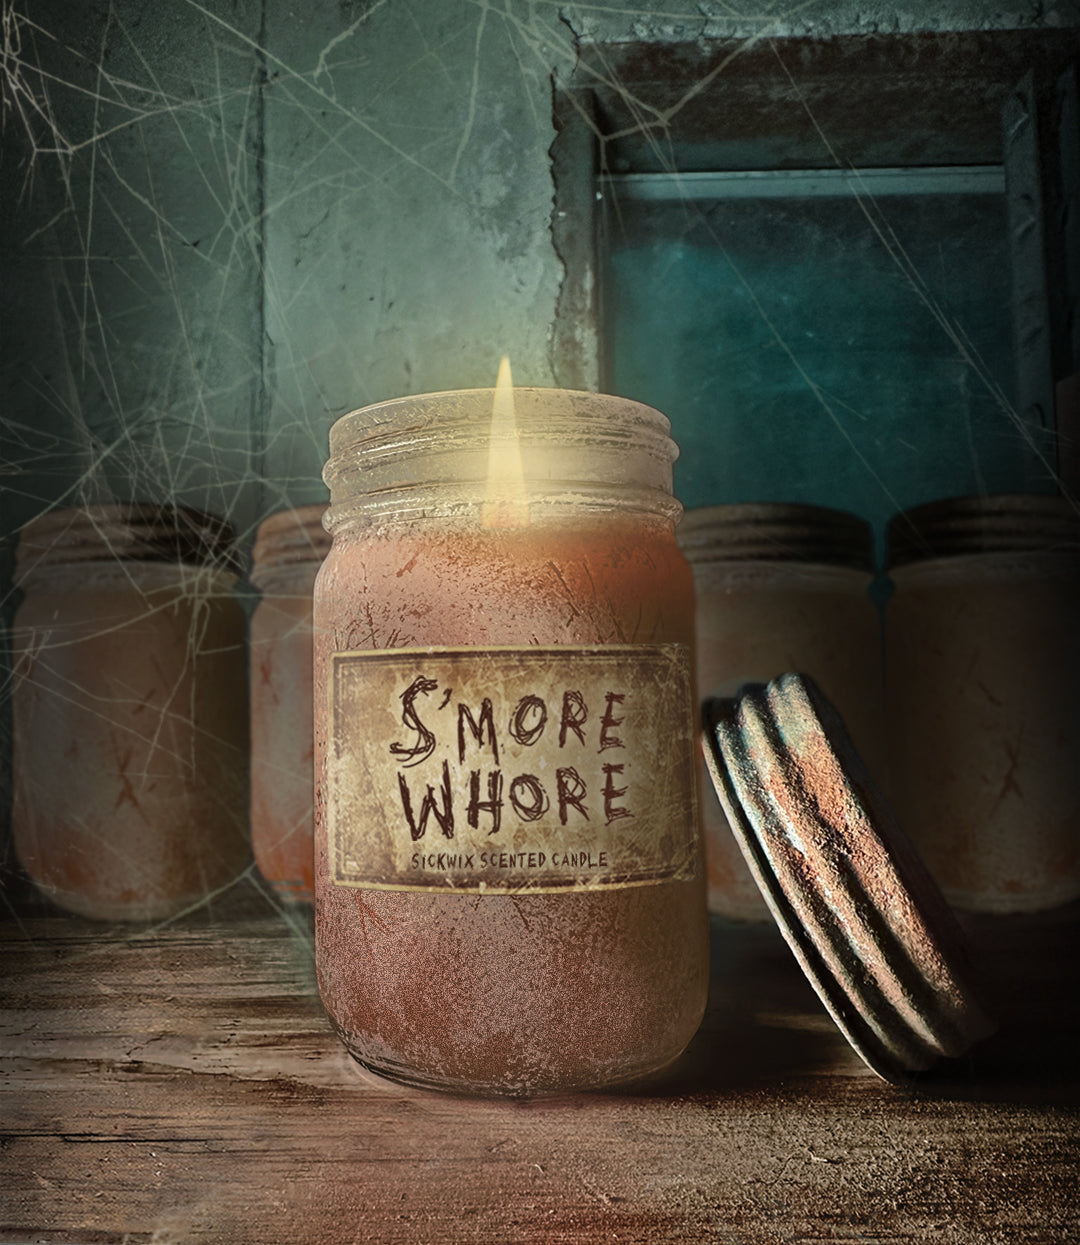 "S'MORE WHORE" APOTHESCARY CANDLE